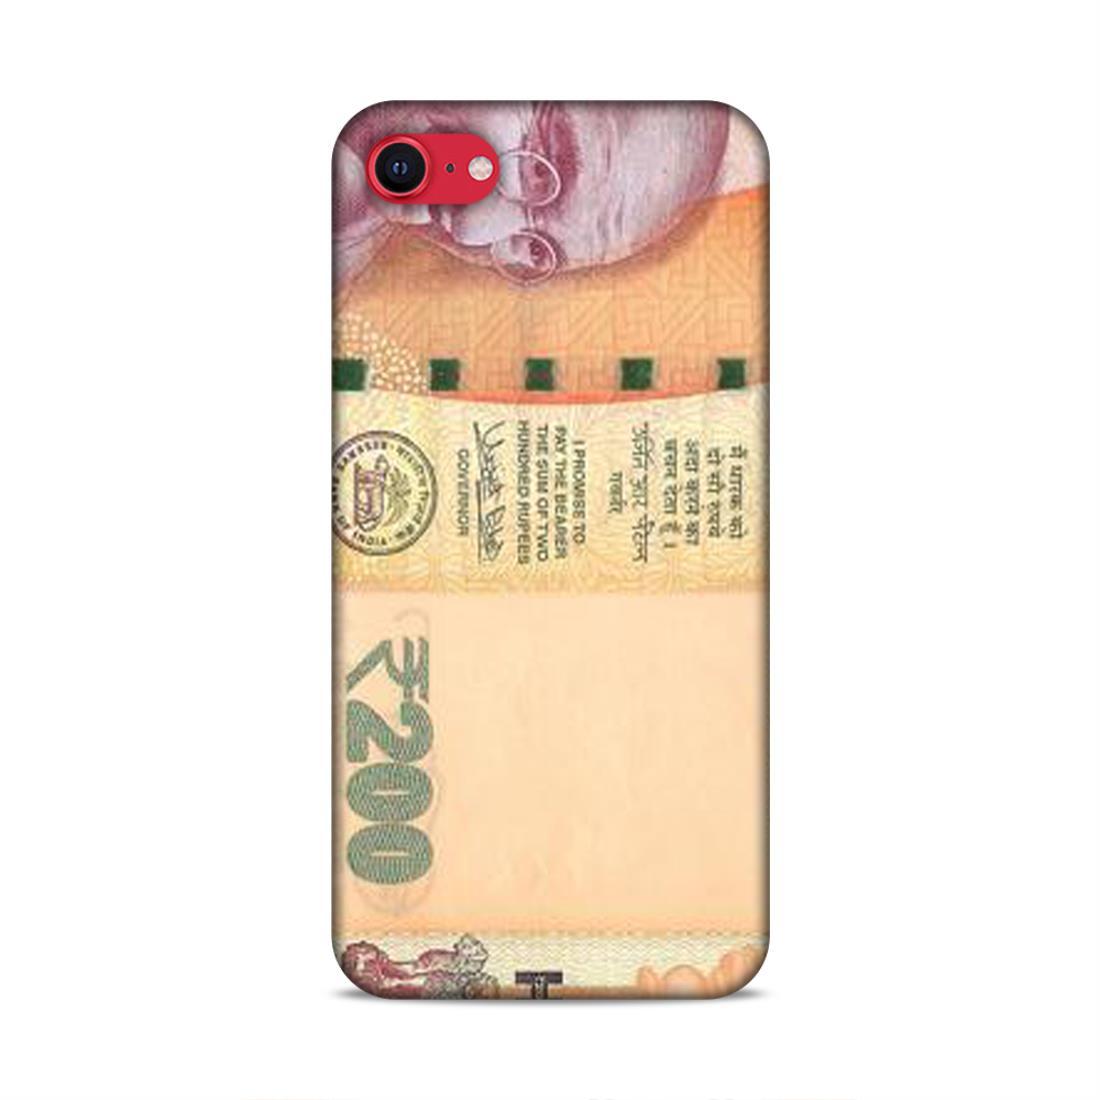 Rs 200 Currency Note iPhone SE 2020 Phone Case Cover